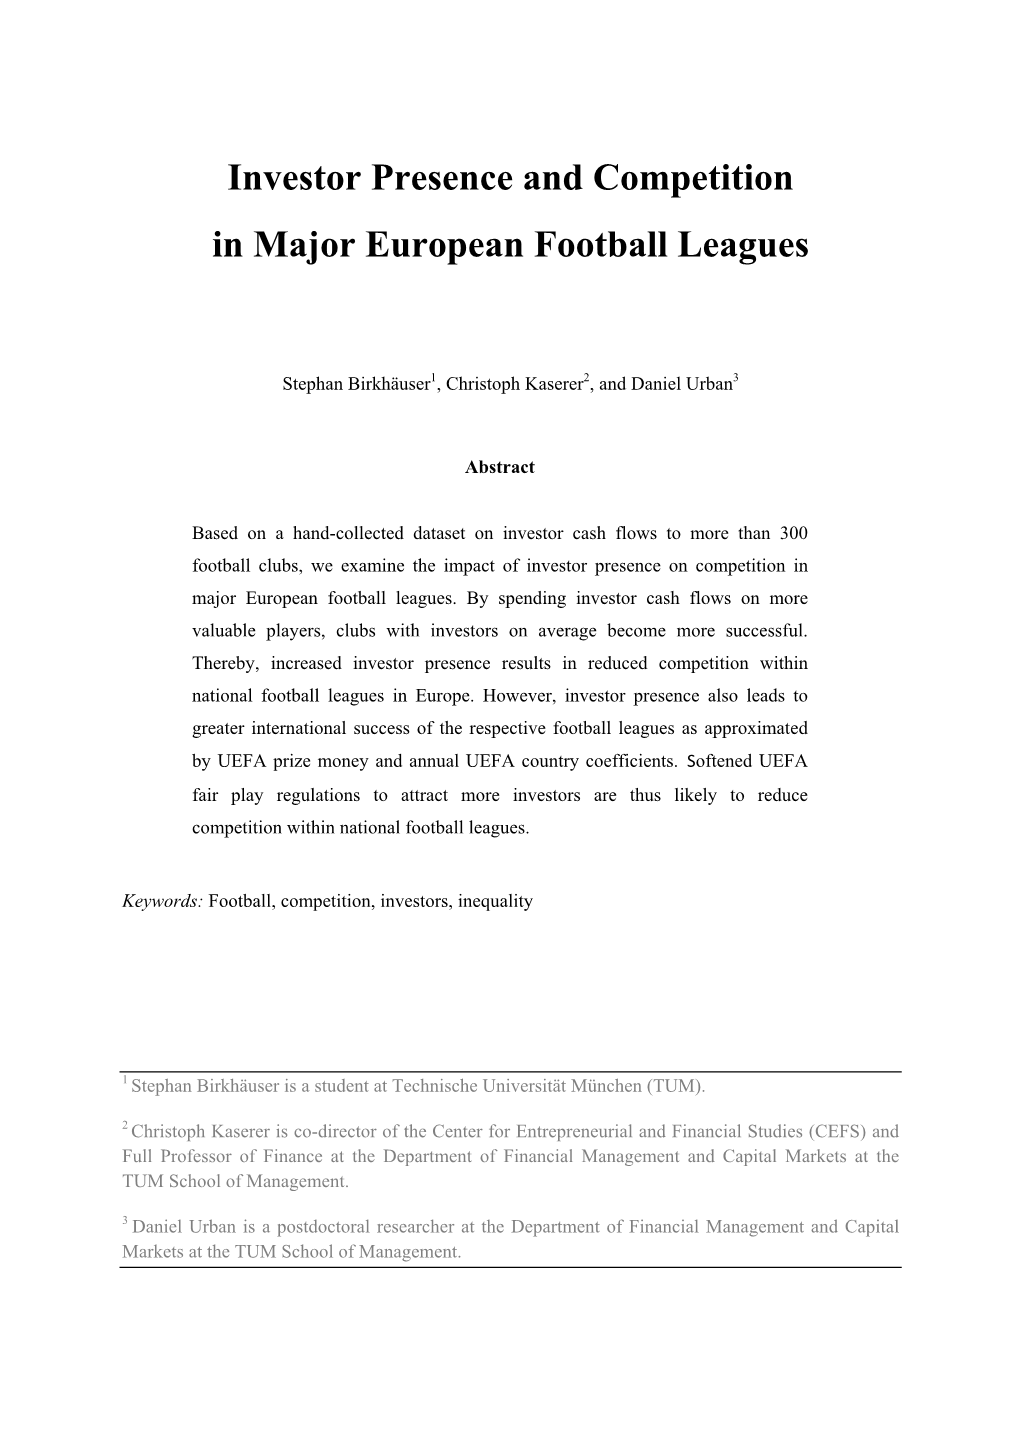 Investor Presence and Competition in Major European Football Leagues